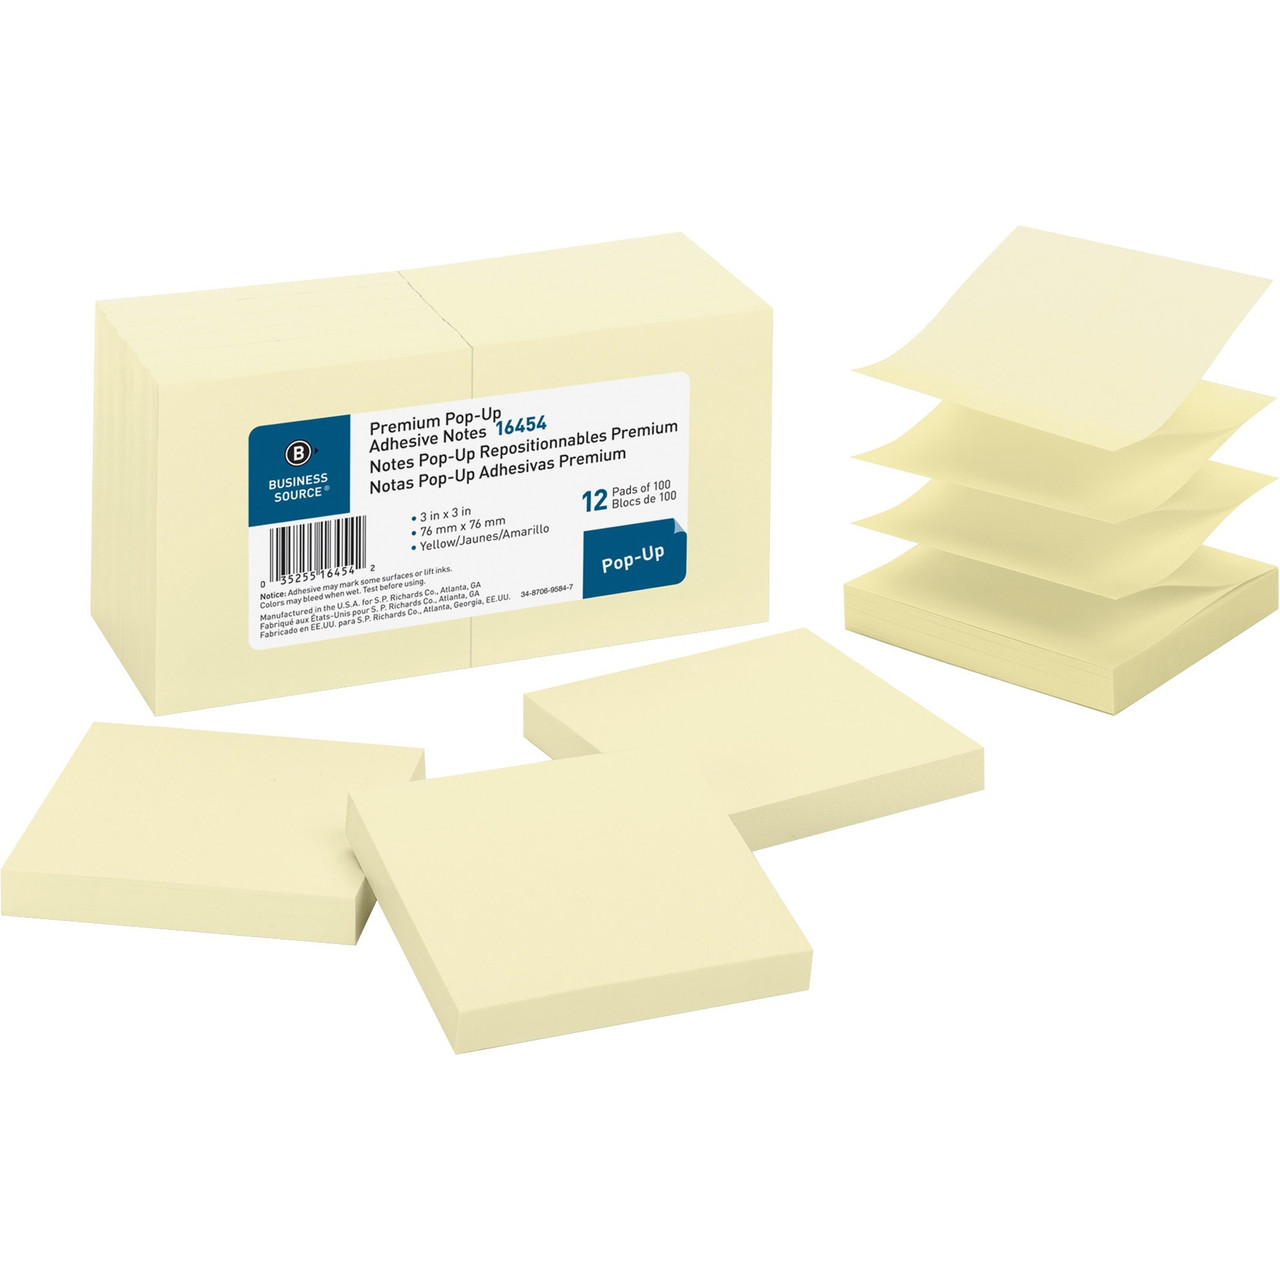 Business Source Adhesive Notes 100 Sheets 3"x5" 12/PK Yellow  36613